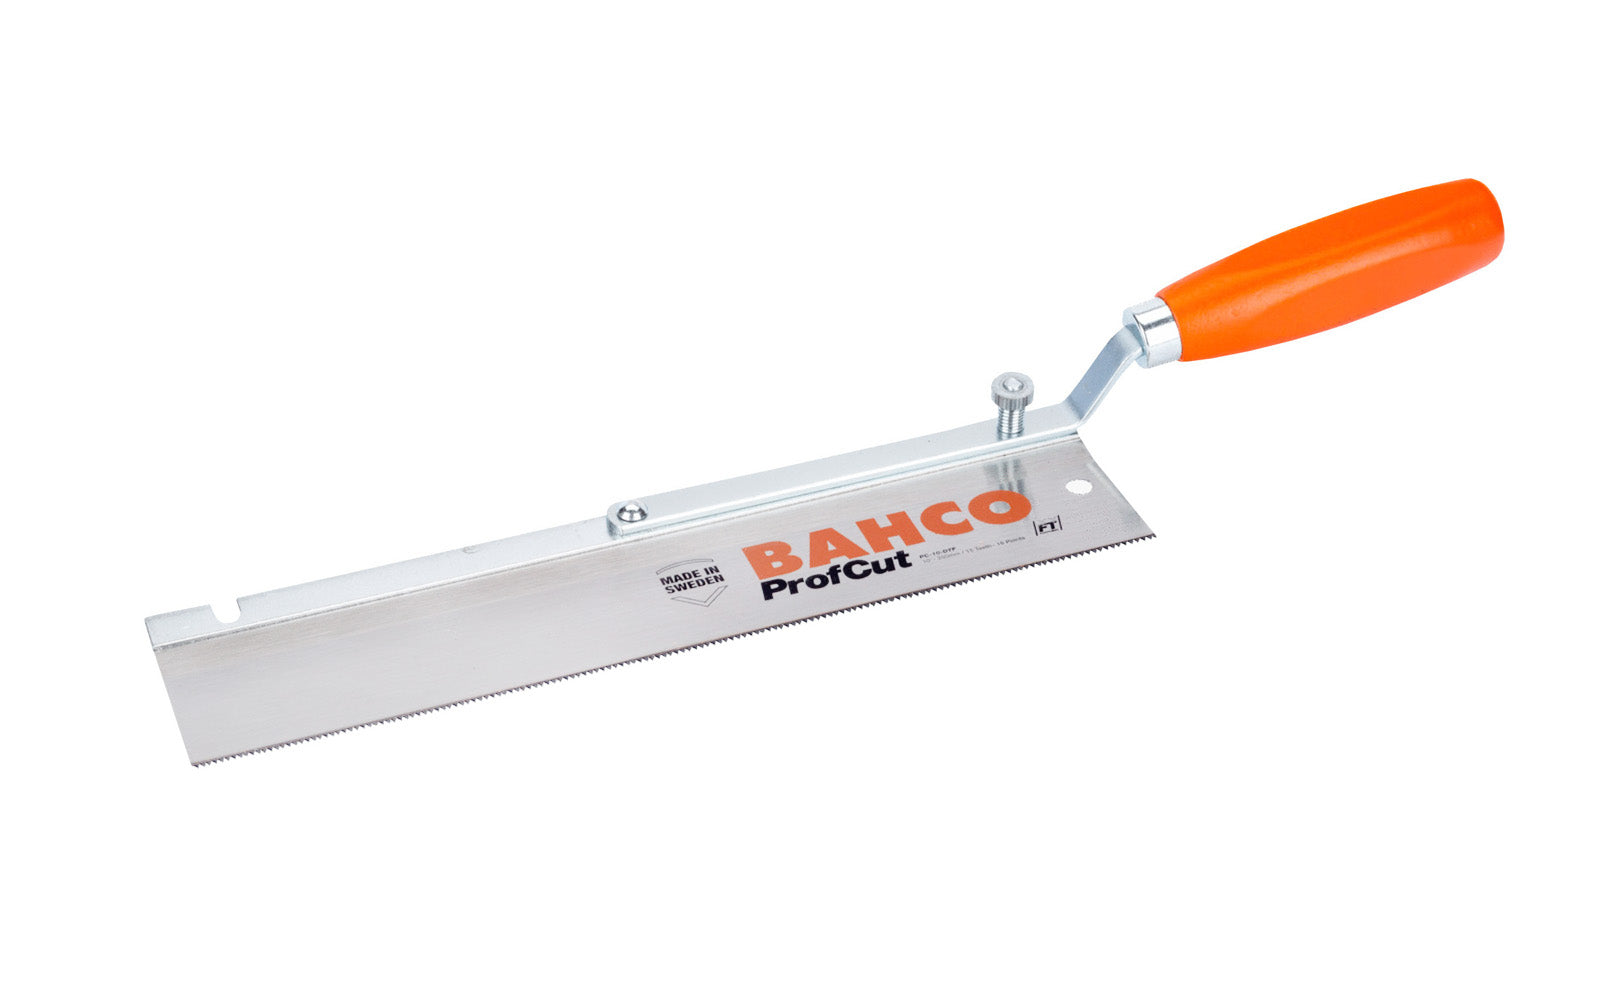 The Bahco "ProfCut" Offset Dovetail Saw 15 TPI is ideal for cutting wood, plywood, laminates, timber, plaster, plastics. Universal teething, hardpoint teeth for lasting sharpness. Handle swings to allow left & right hand sawing where access is restricted. Light steel back for rigidity. ~ Model PC-10-DTF ~ 7311518263560. Made in Sweden